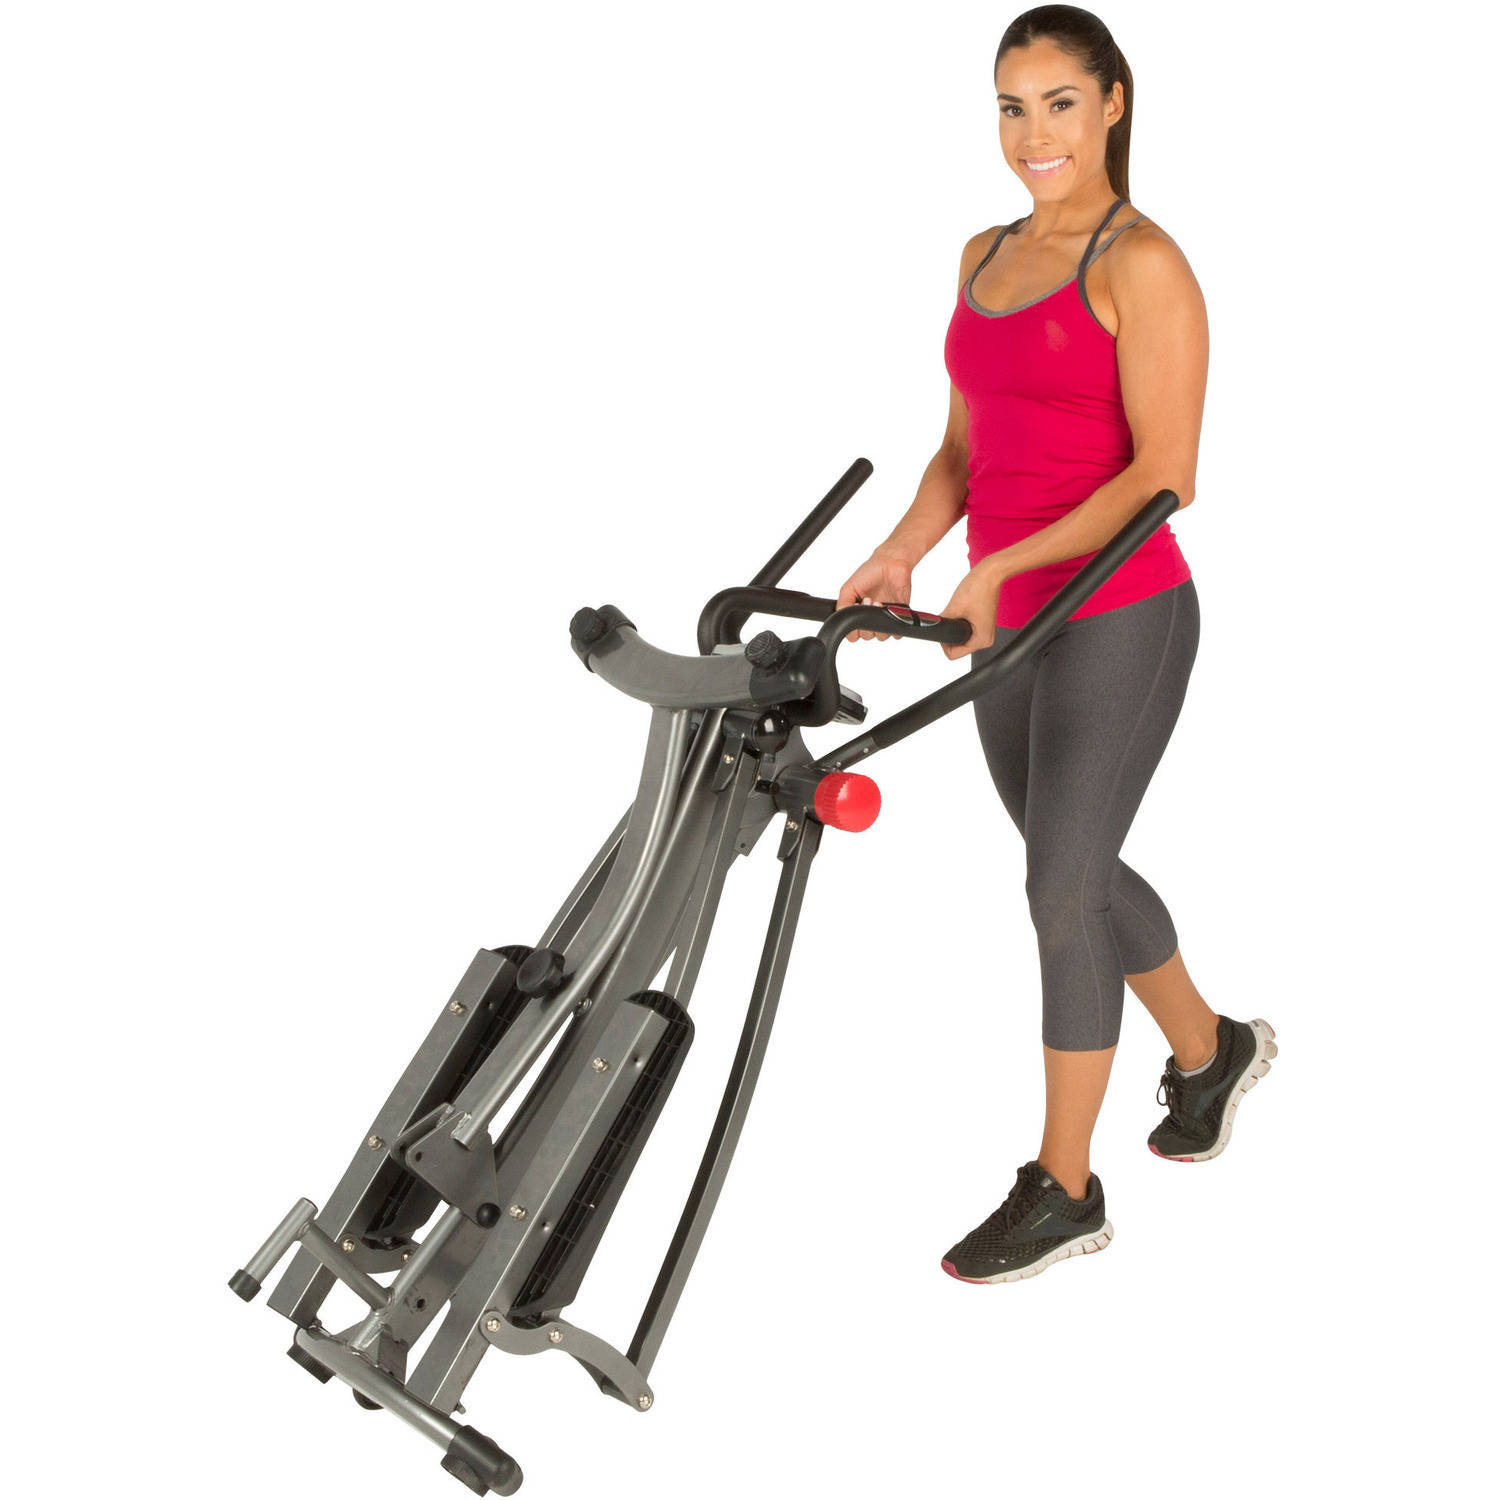 Fitness Reality Multi-Direction Elliptical Cloud Walker X1 with Pulse Sensors - image 11 of 31